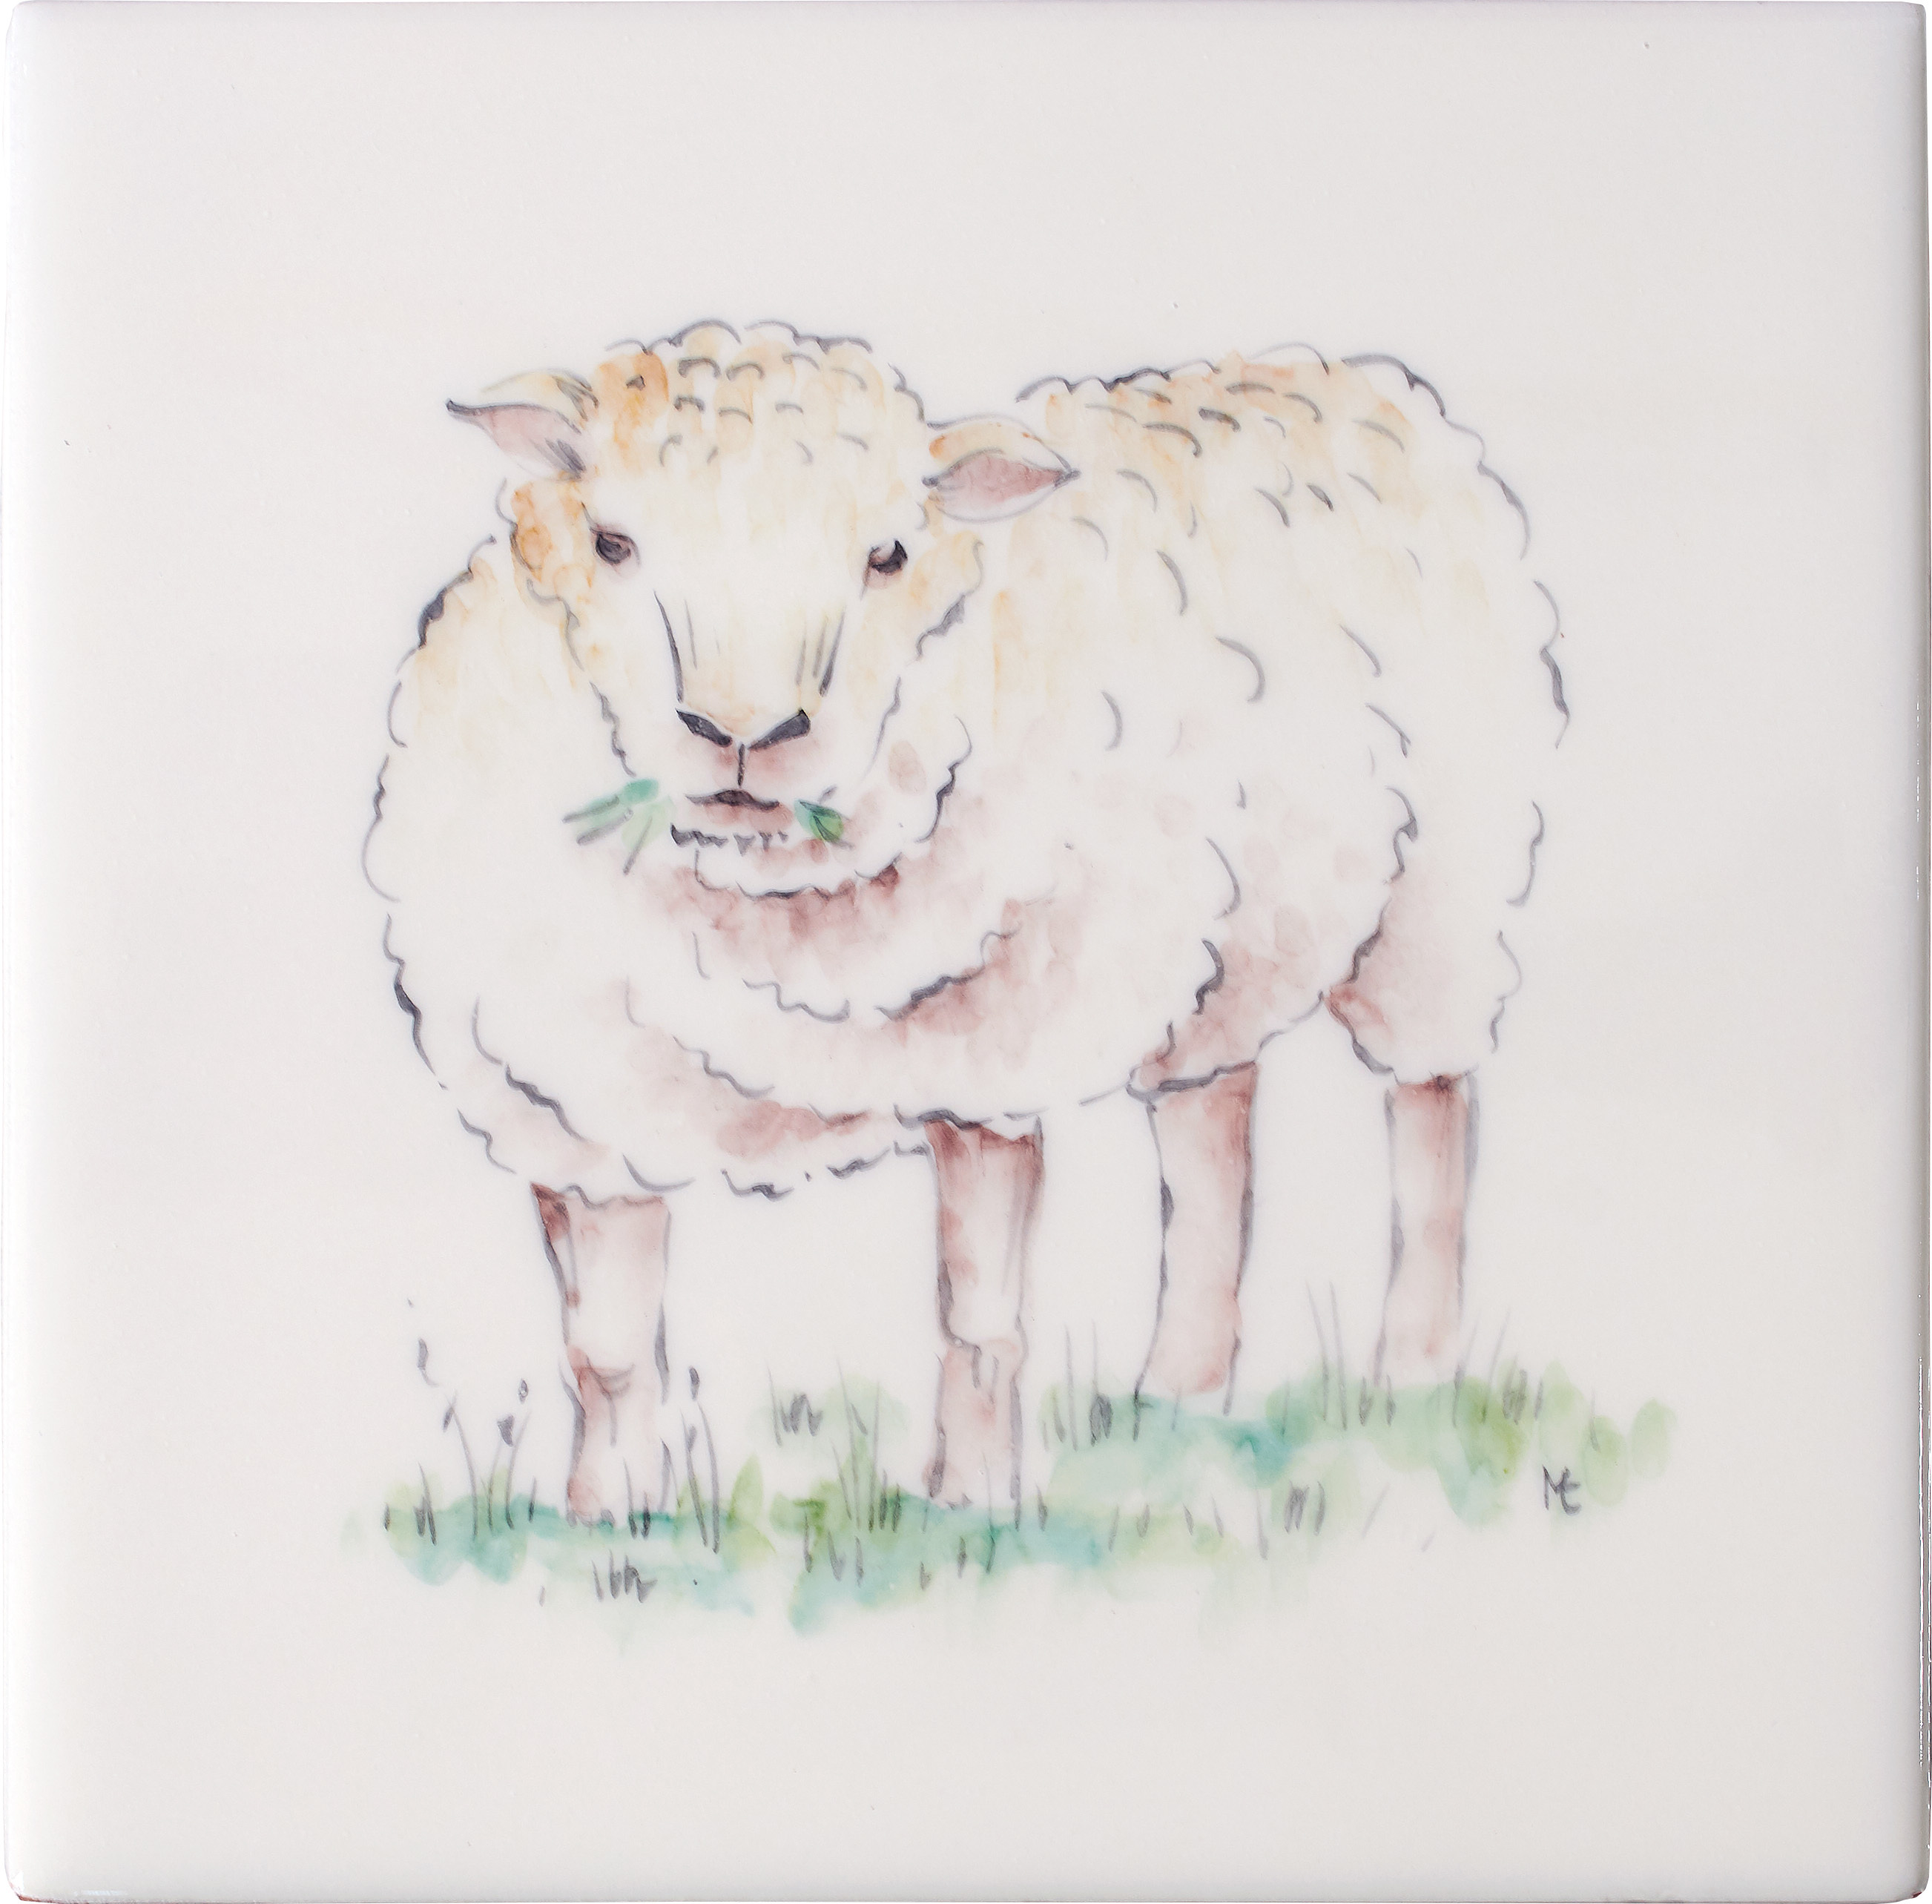 Sheep Square, product variant image